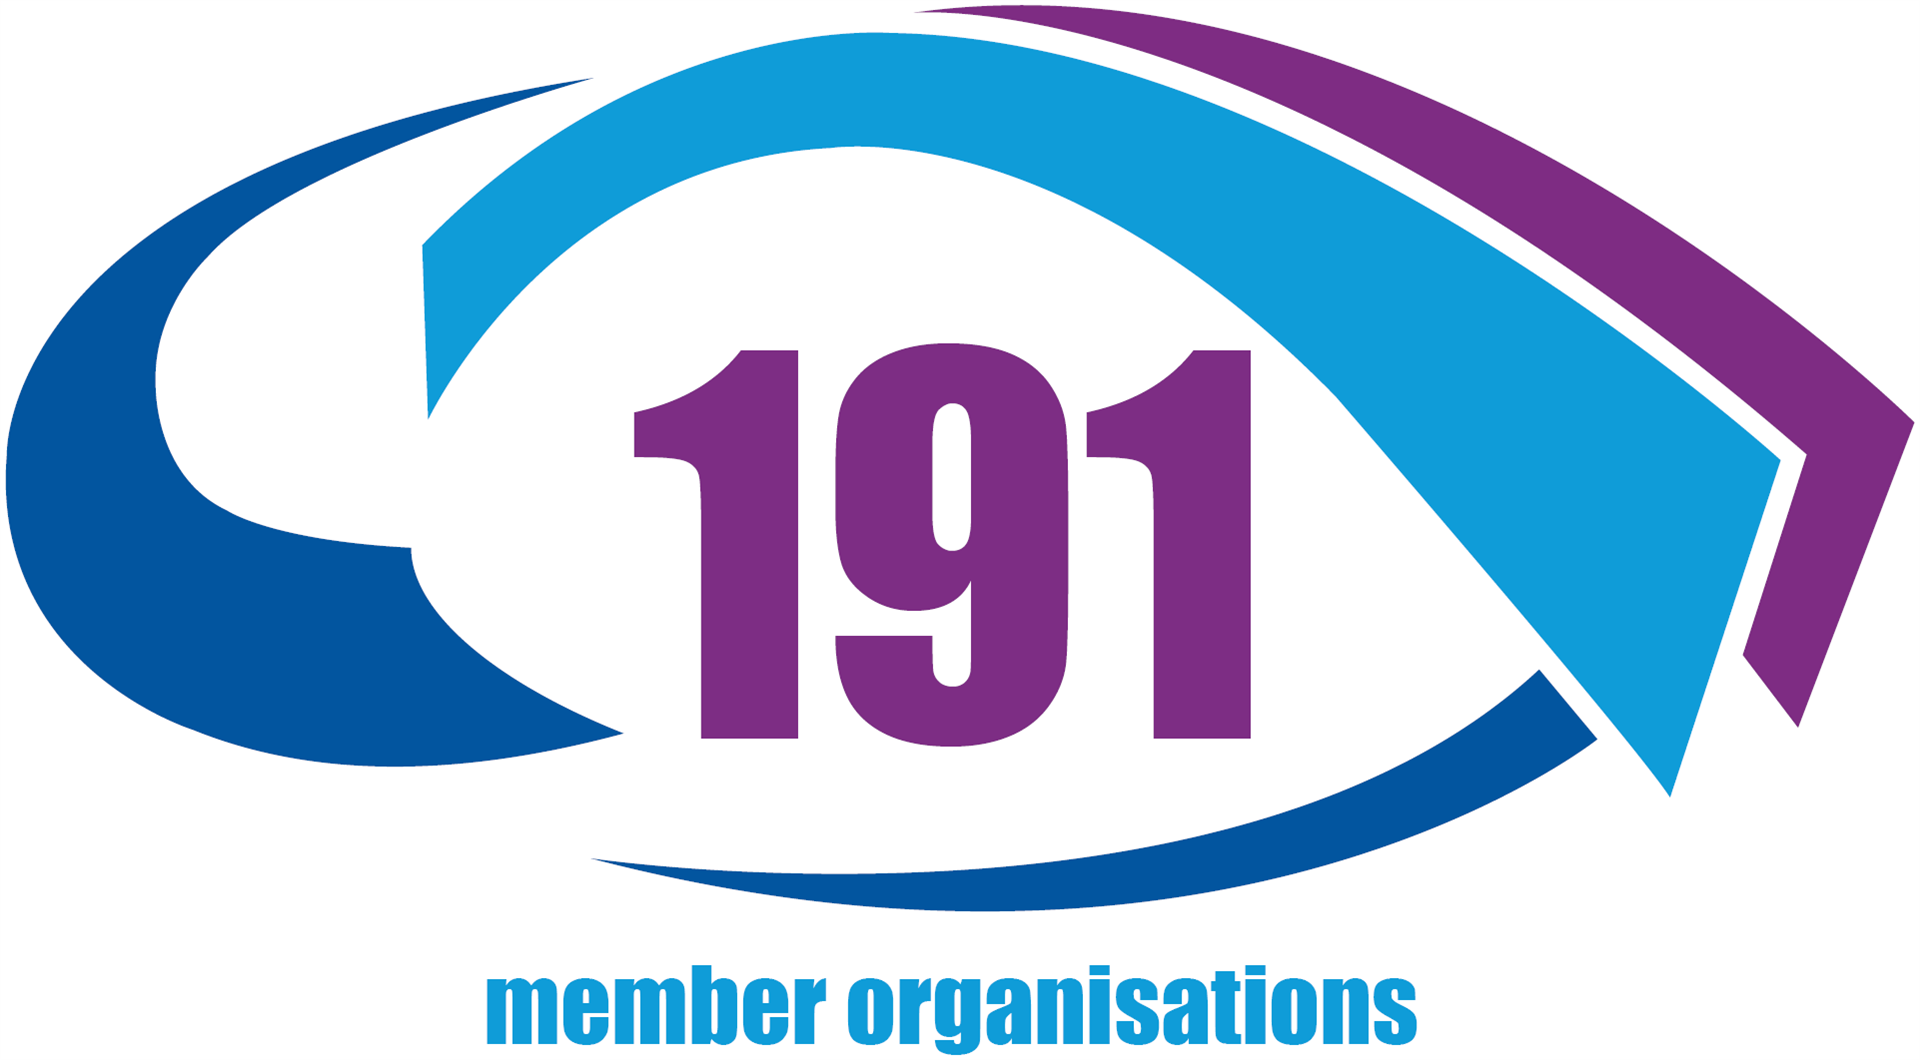 191 organisations are members of AMOSSHE